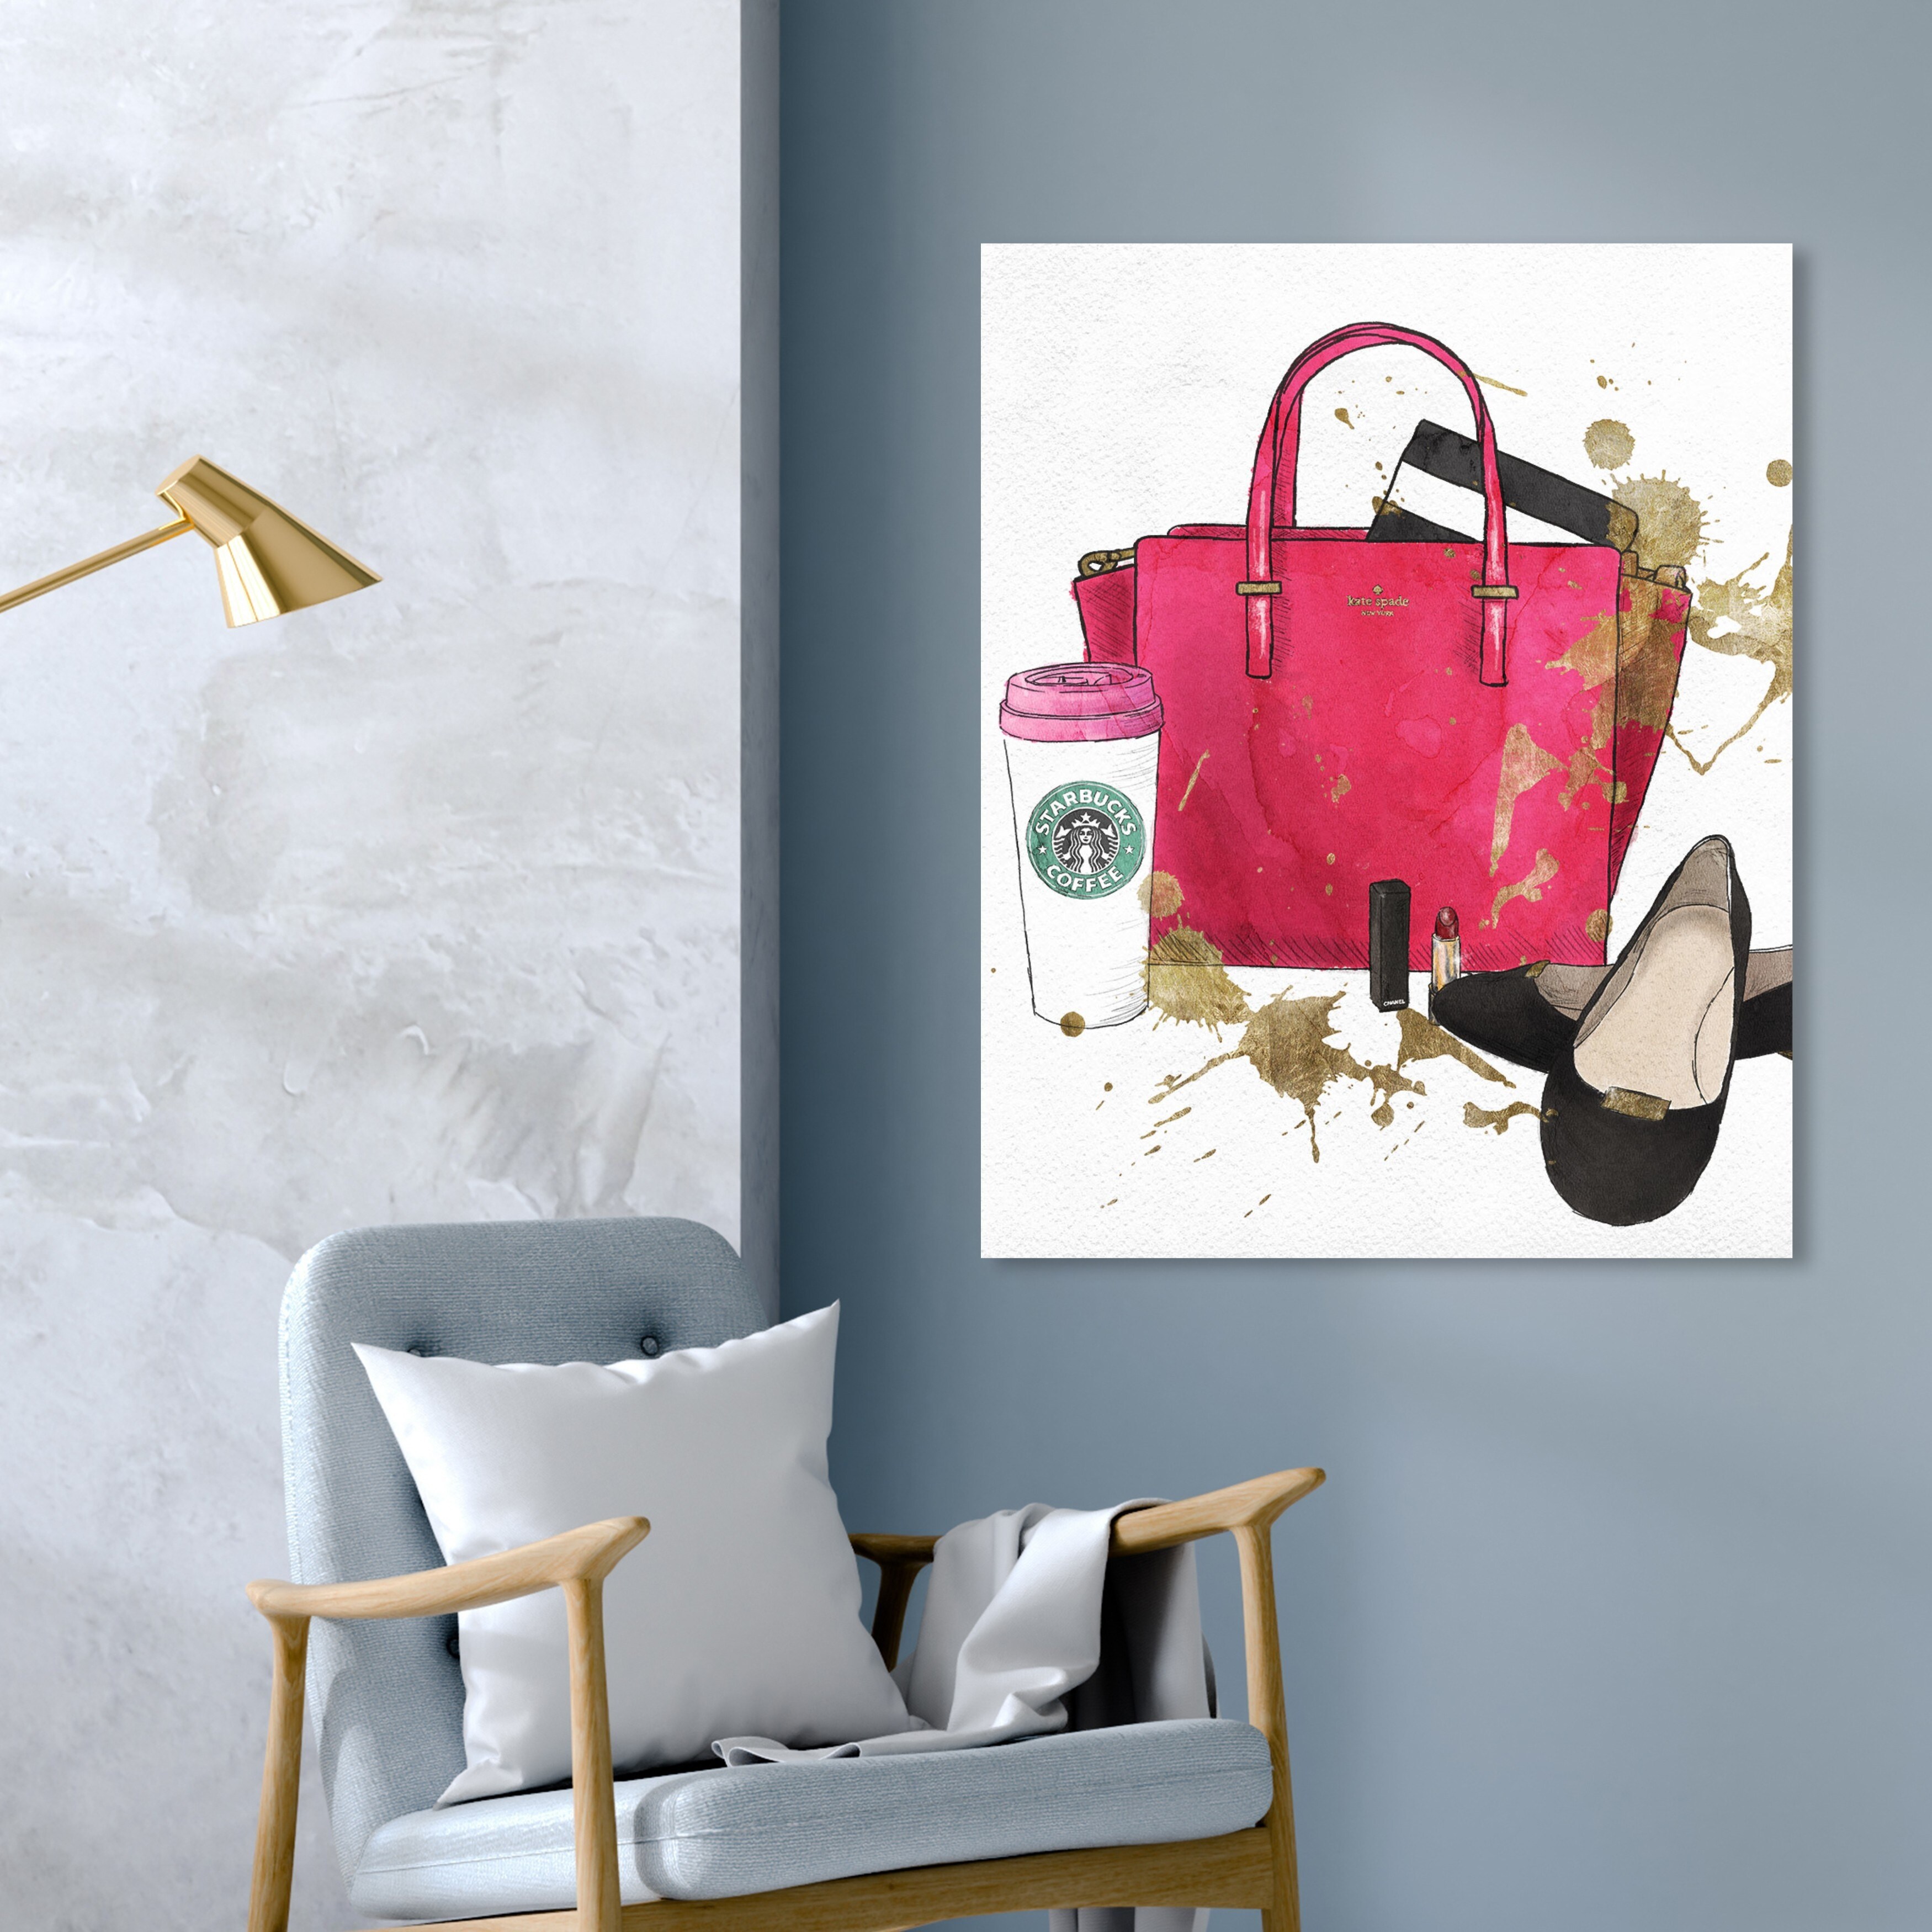 Oliver Gal Brown 'Bags, Bags, Bags- Orange' Fashion and Glam Wall Art Canvas Print